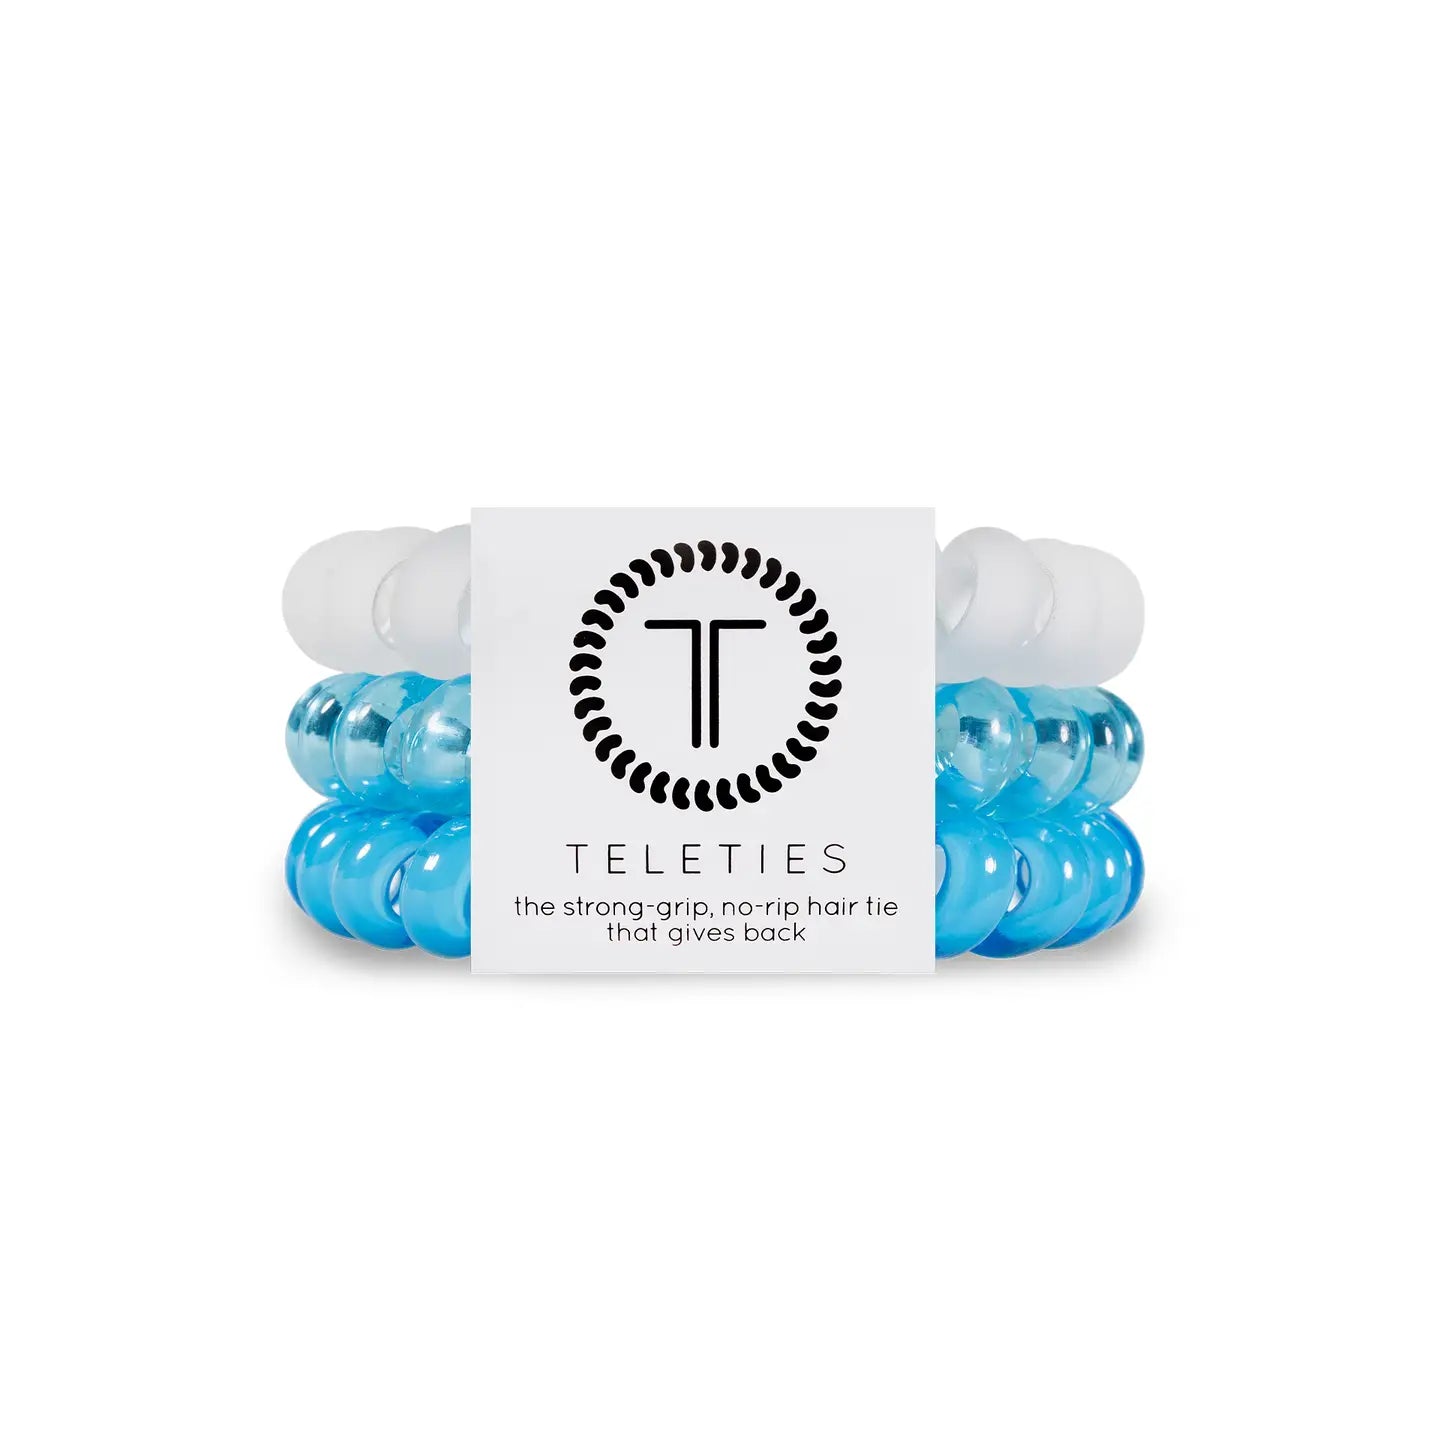 set of 3 teletie hair coils. one matte white, one translucent blue, and one bright blue